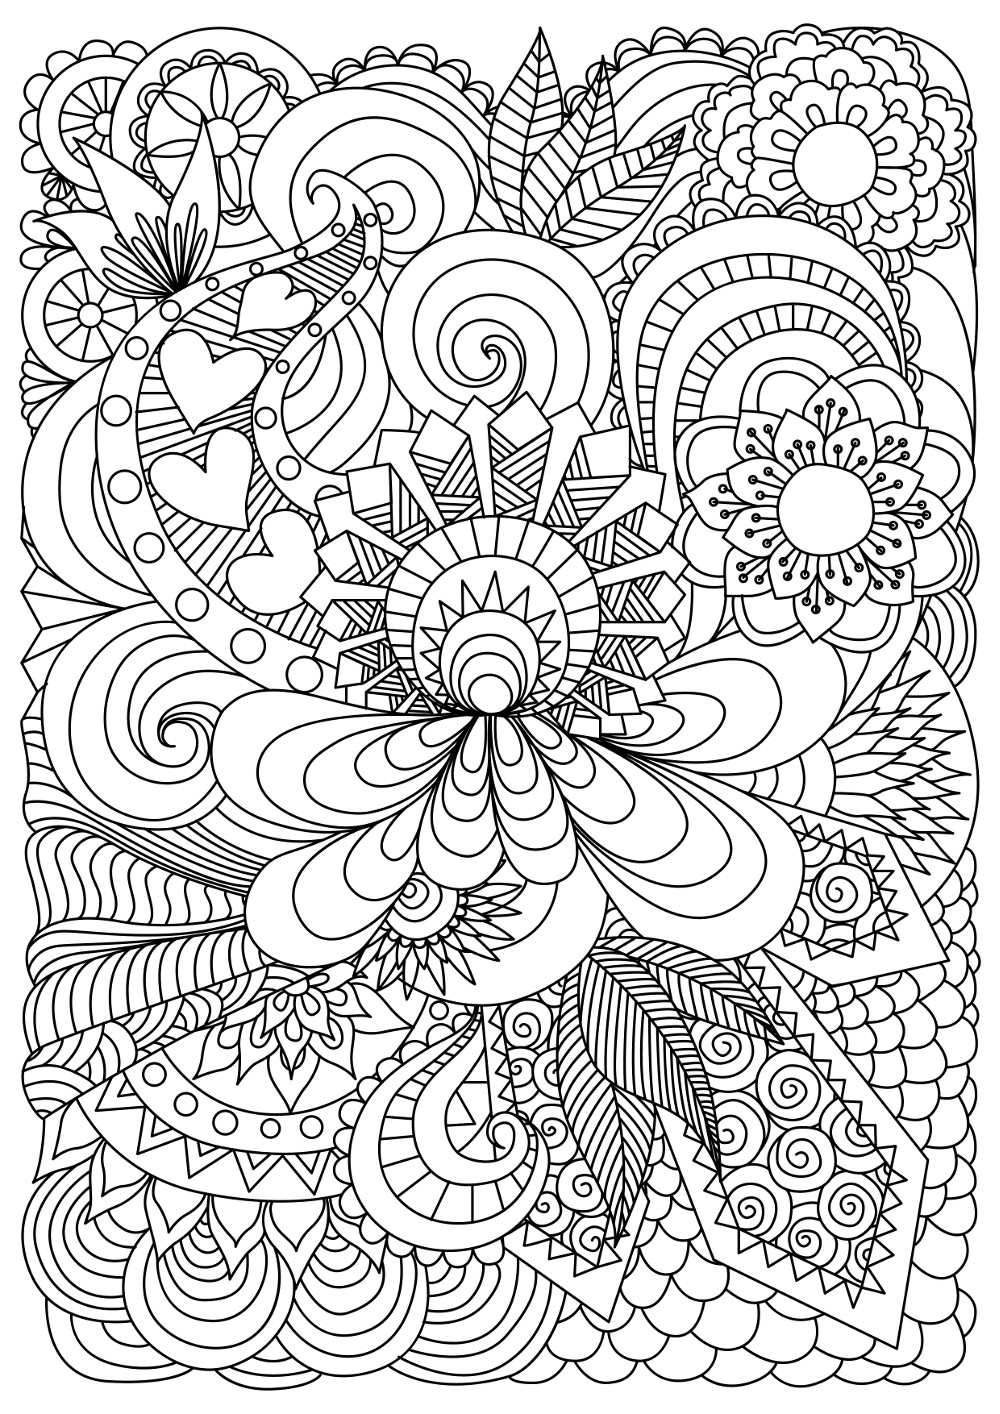 37 Best Adults Coloring Pages - Updated 2018